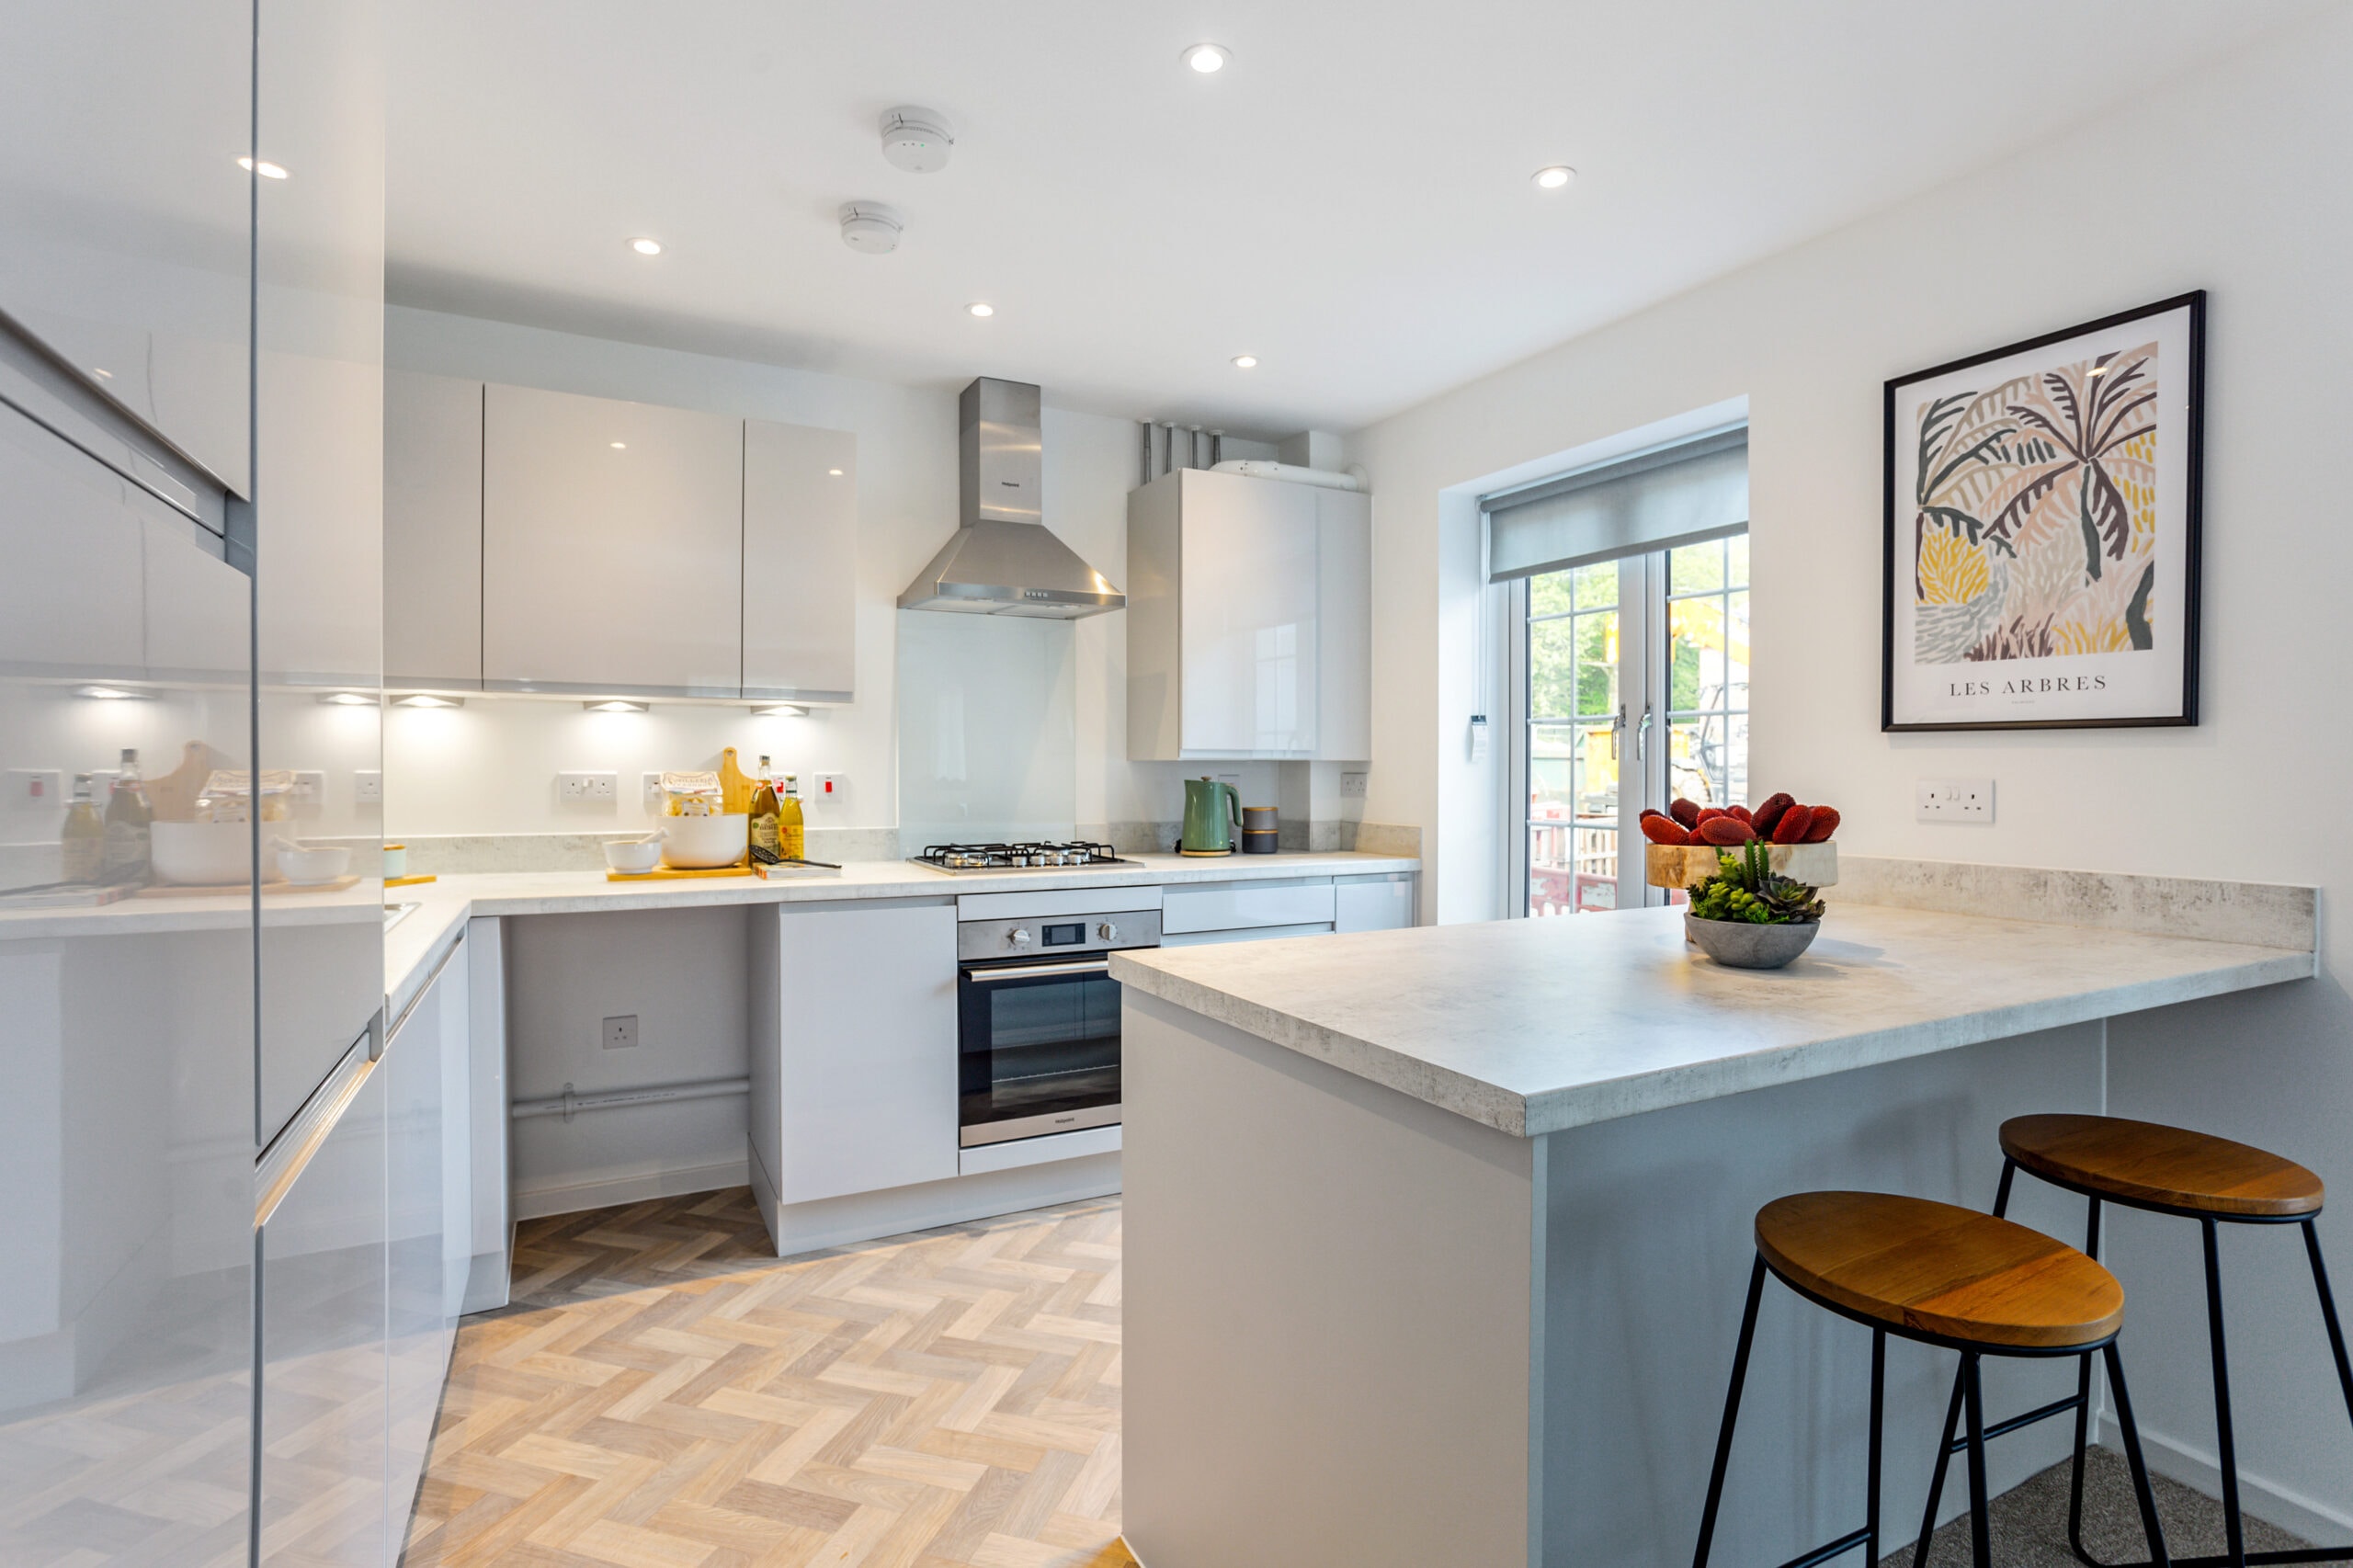 Image of the interior of The Old Mansion Collective development from VIVID Homes - available to purchase through Shared Ownership on Share to Buy!